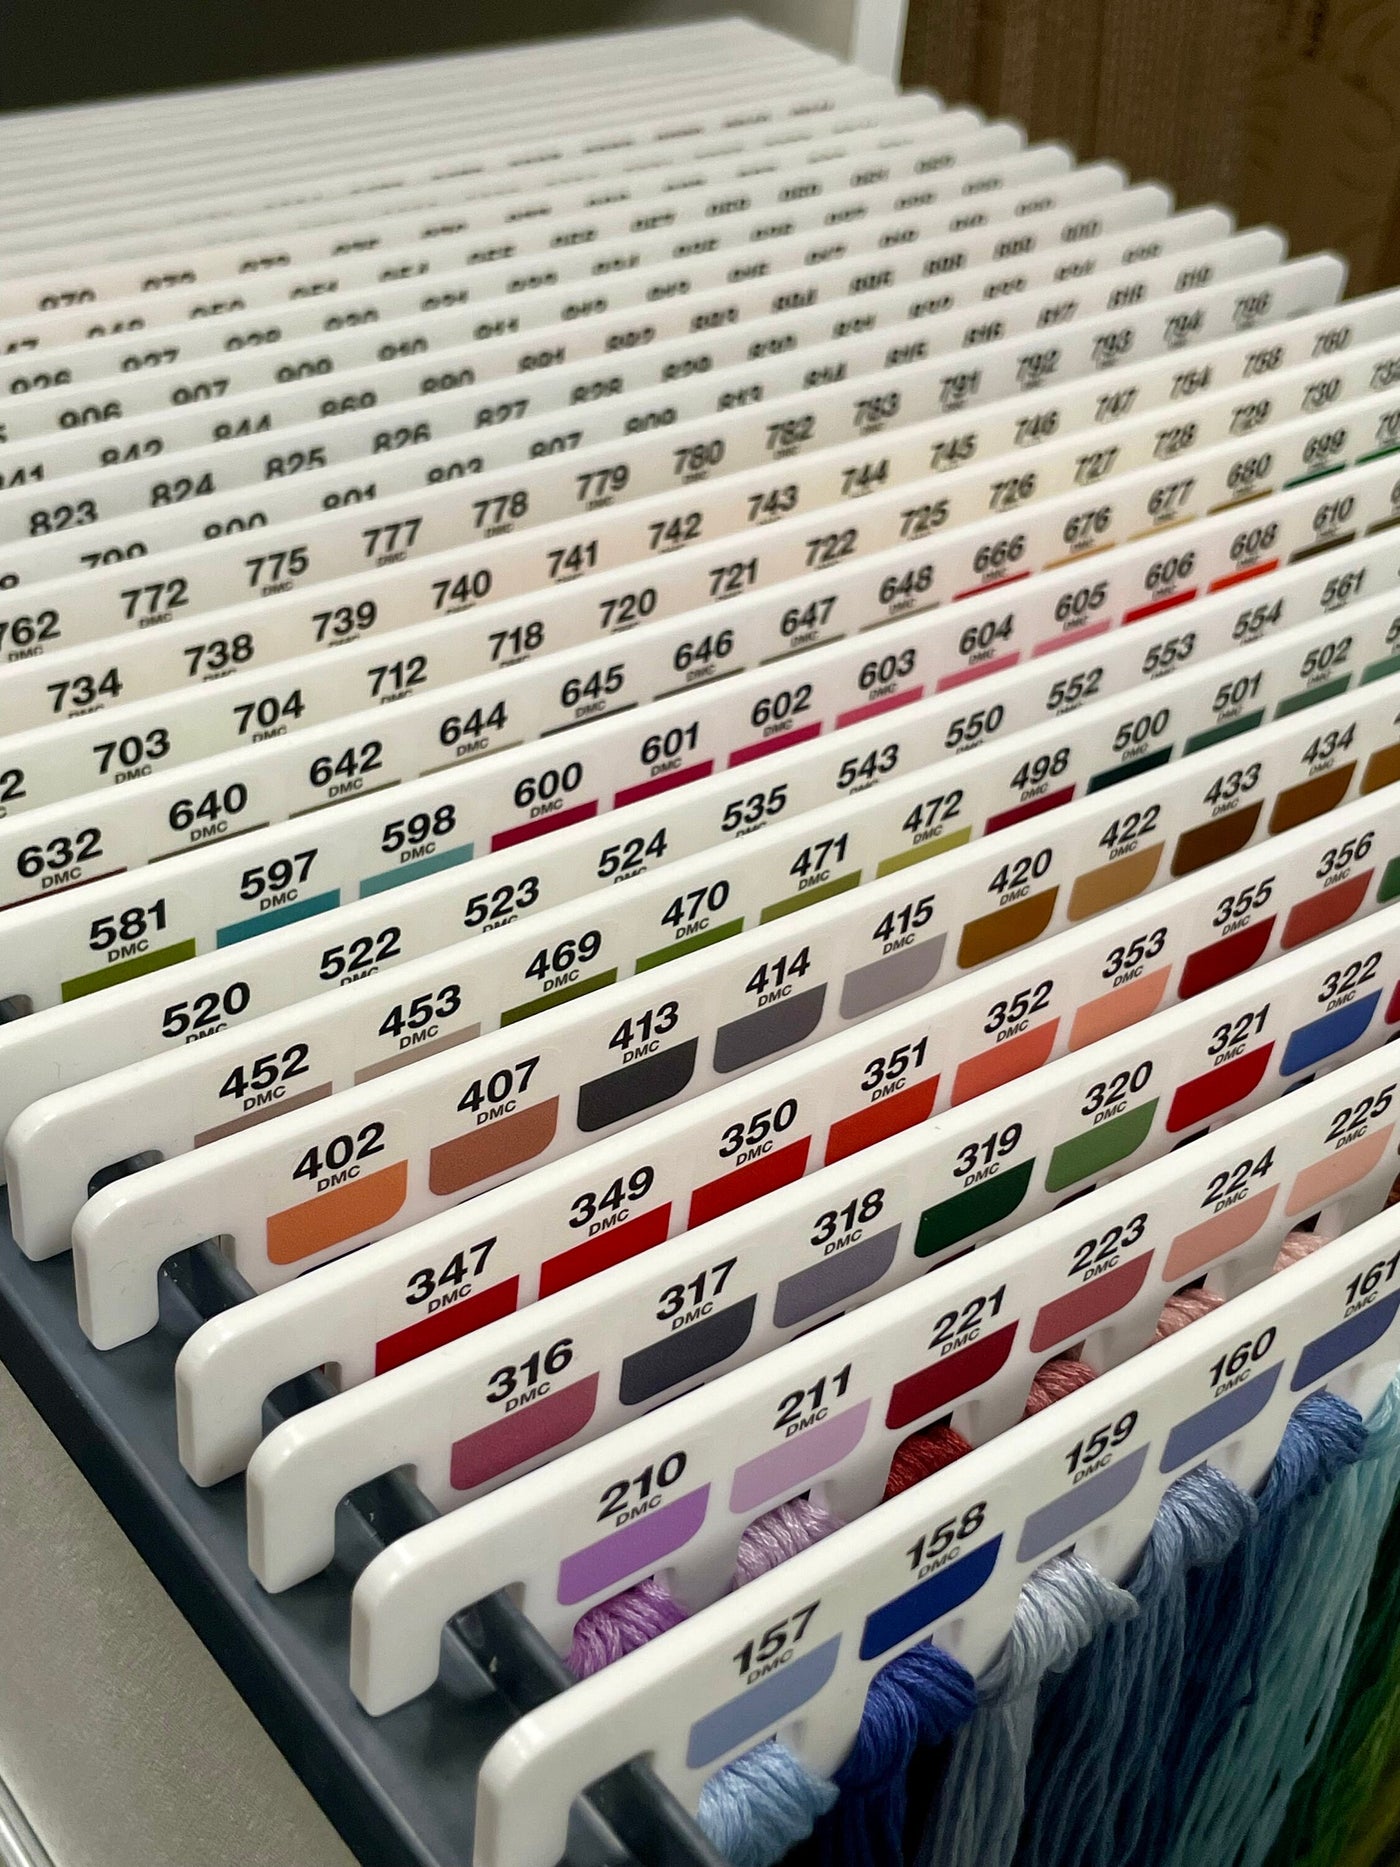 Floss hangers with x500 printed DMC swatches - x34 acrylic hangers (no floss or storage included)